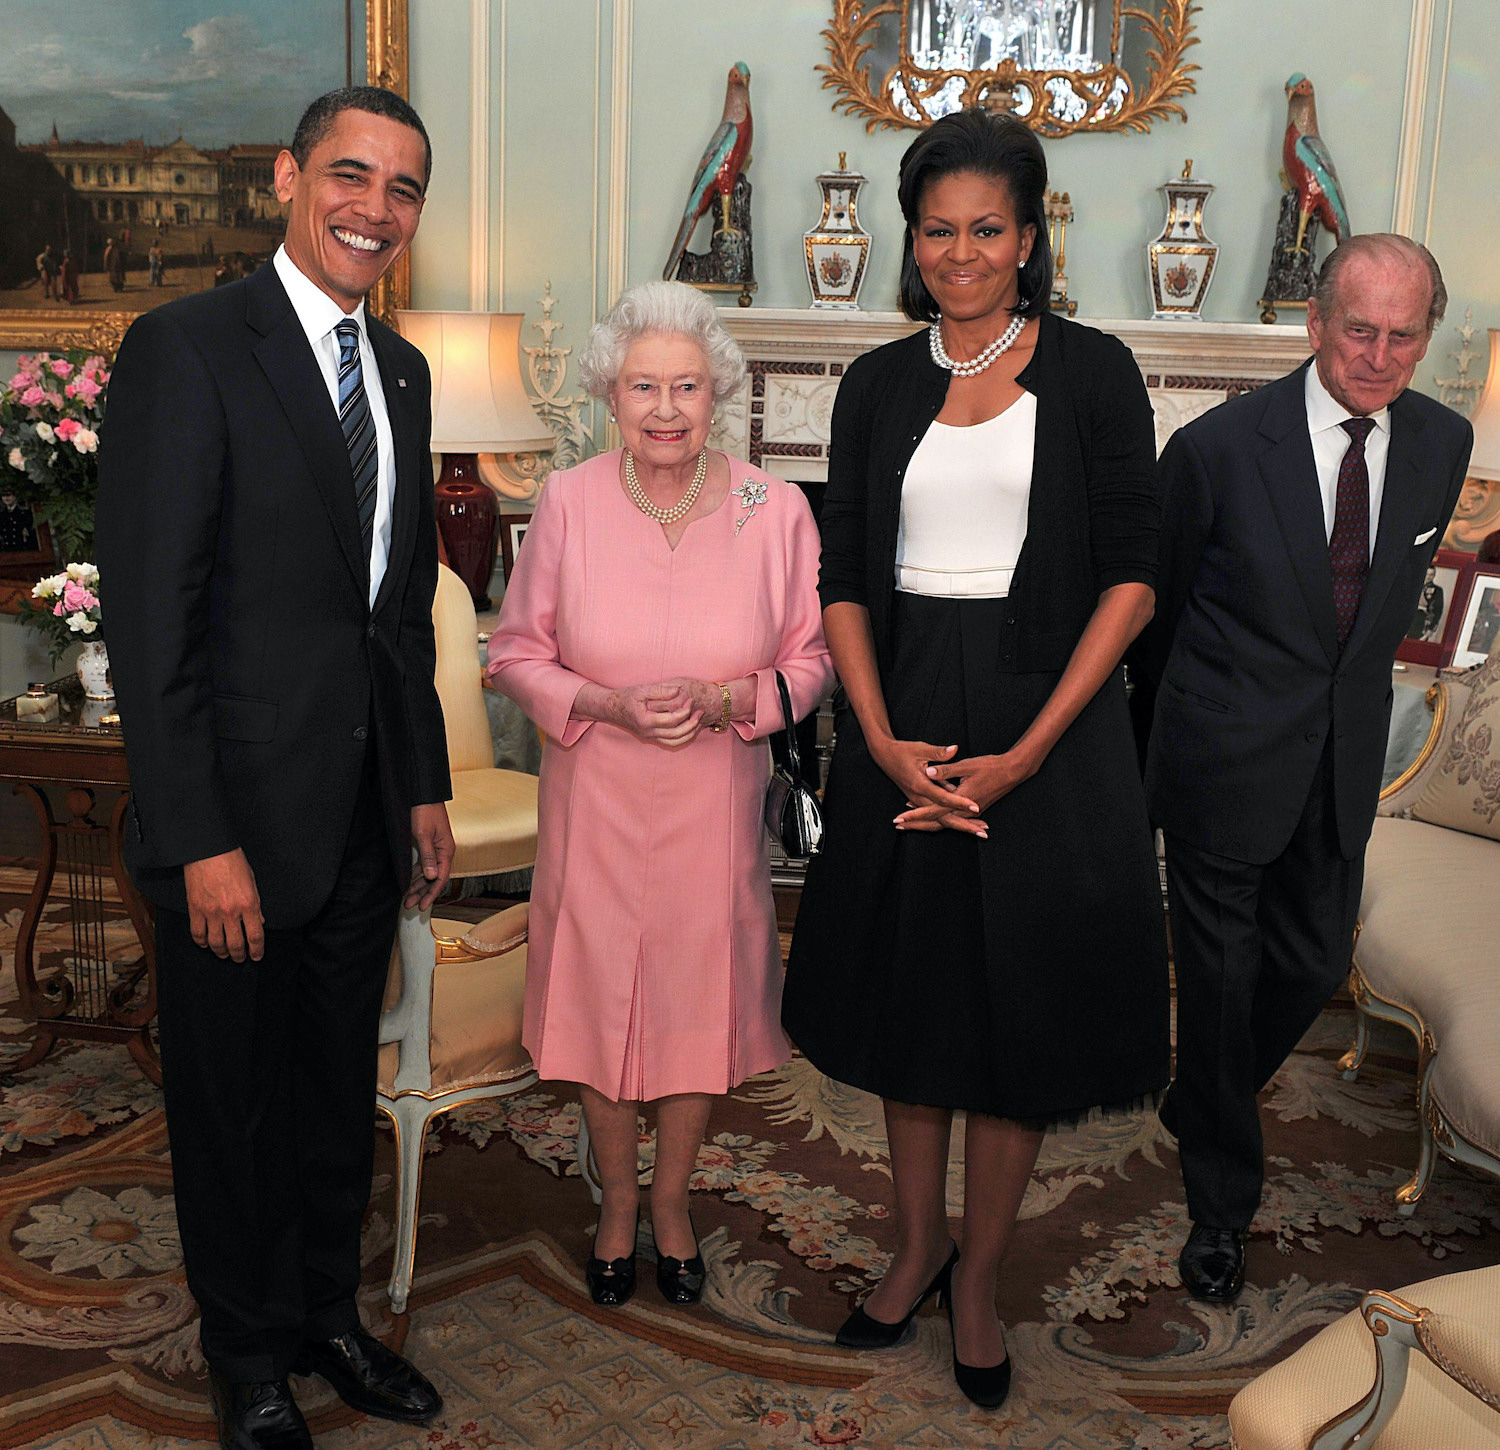 Barack Obama, Queen Elizabeth II, Michelle Obama, and Prince Philip pose for a photo at Buckingham Palace